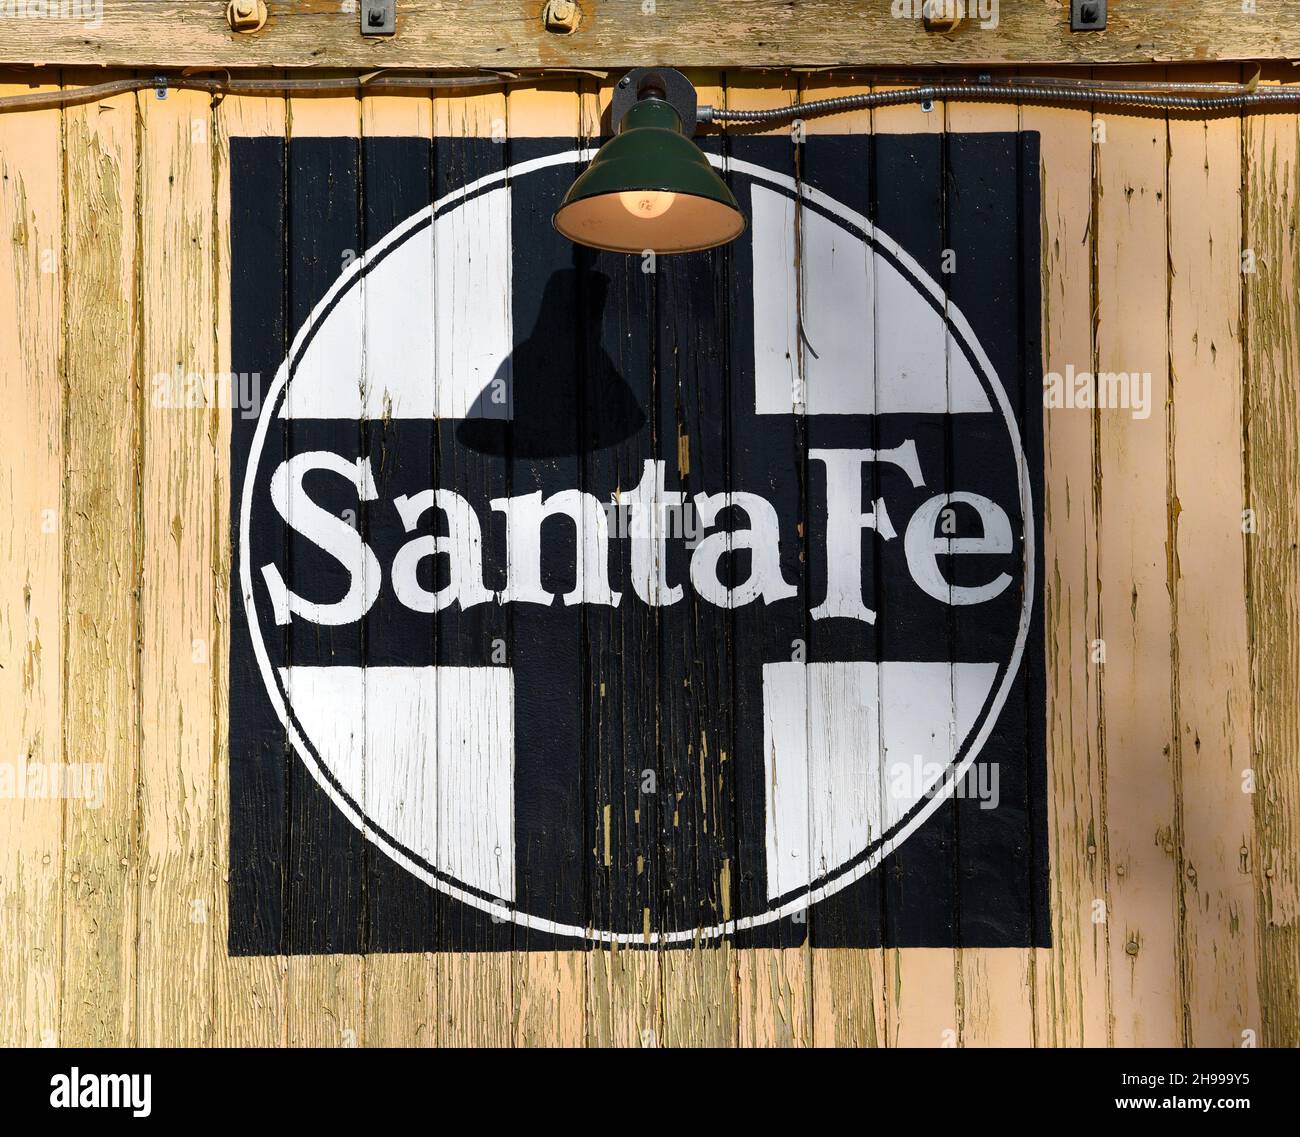 The historic logo for the Atchison, Topeka and Santa Fe Railway painted on a vintage boxcar at historic Lamy Station in Lamy, New Mexico. Stock Photo